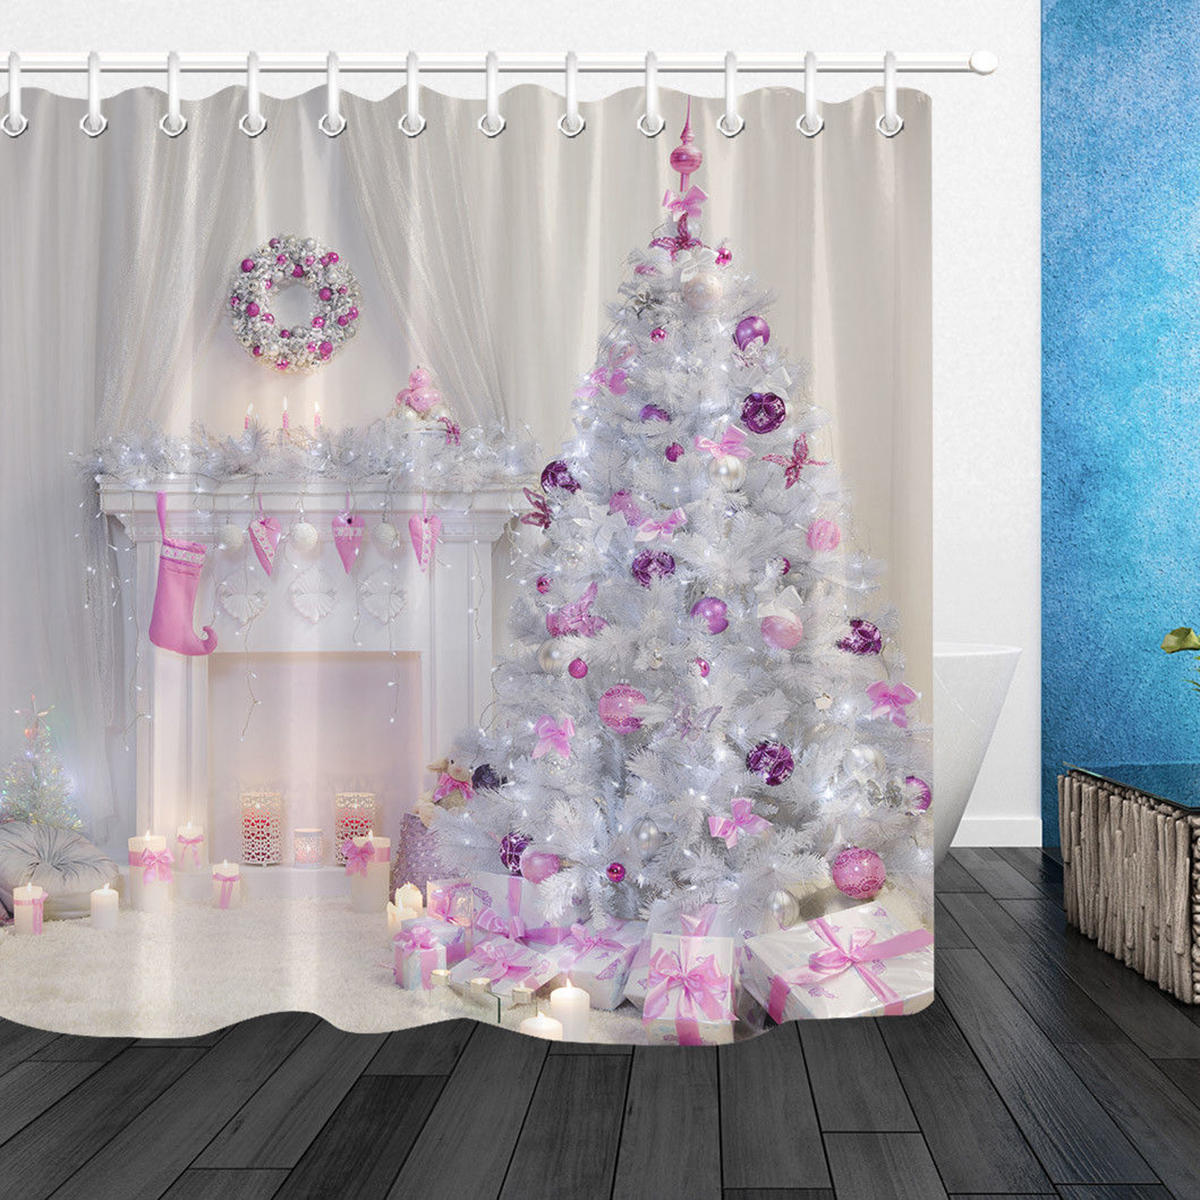 Christmas Tree Interior Xmas Fireplace in Pink Decorated Indoors Shower Curtain Bathroom Sets With Mat Bathroom Fabric F